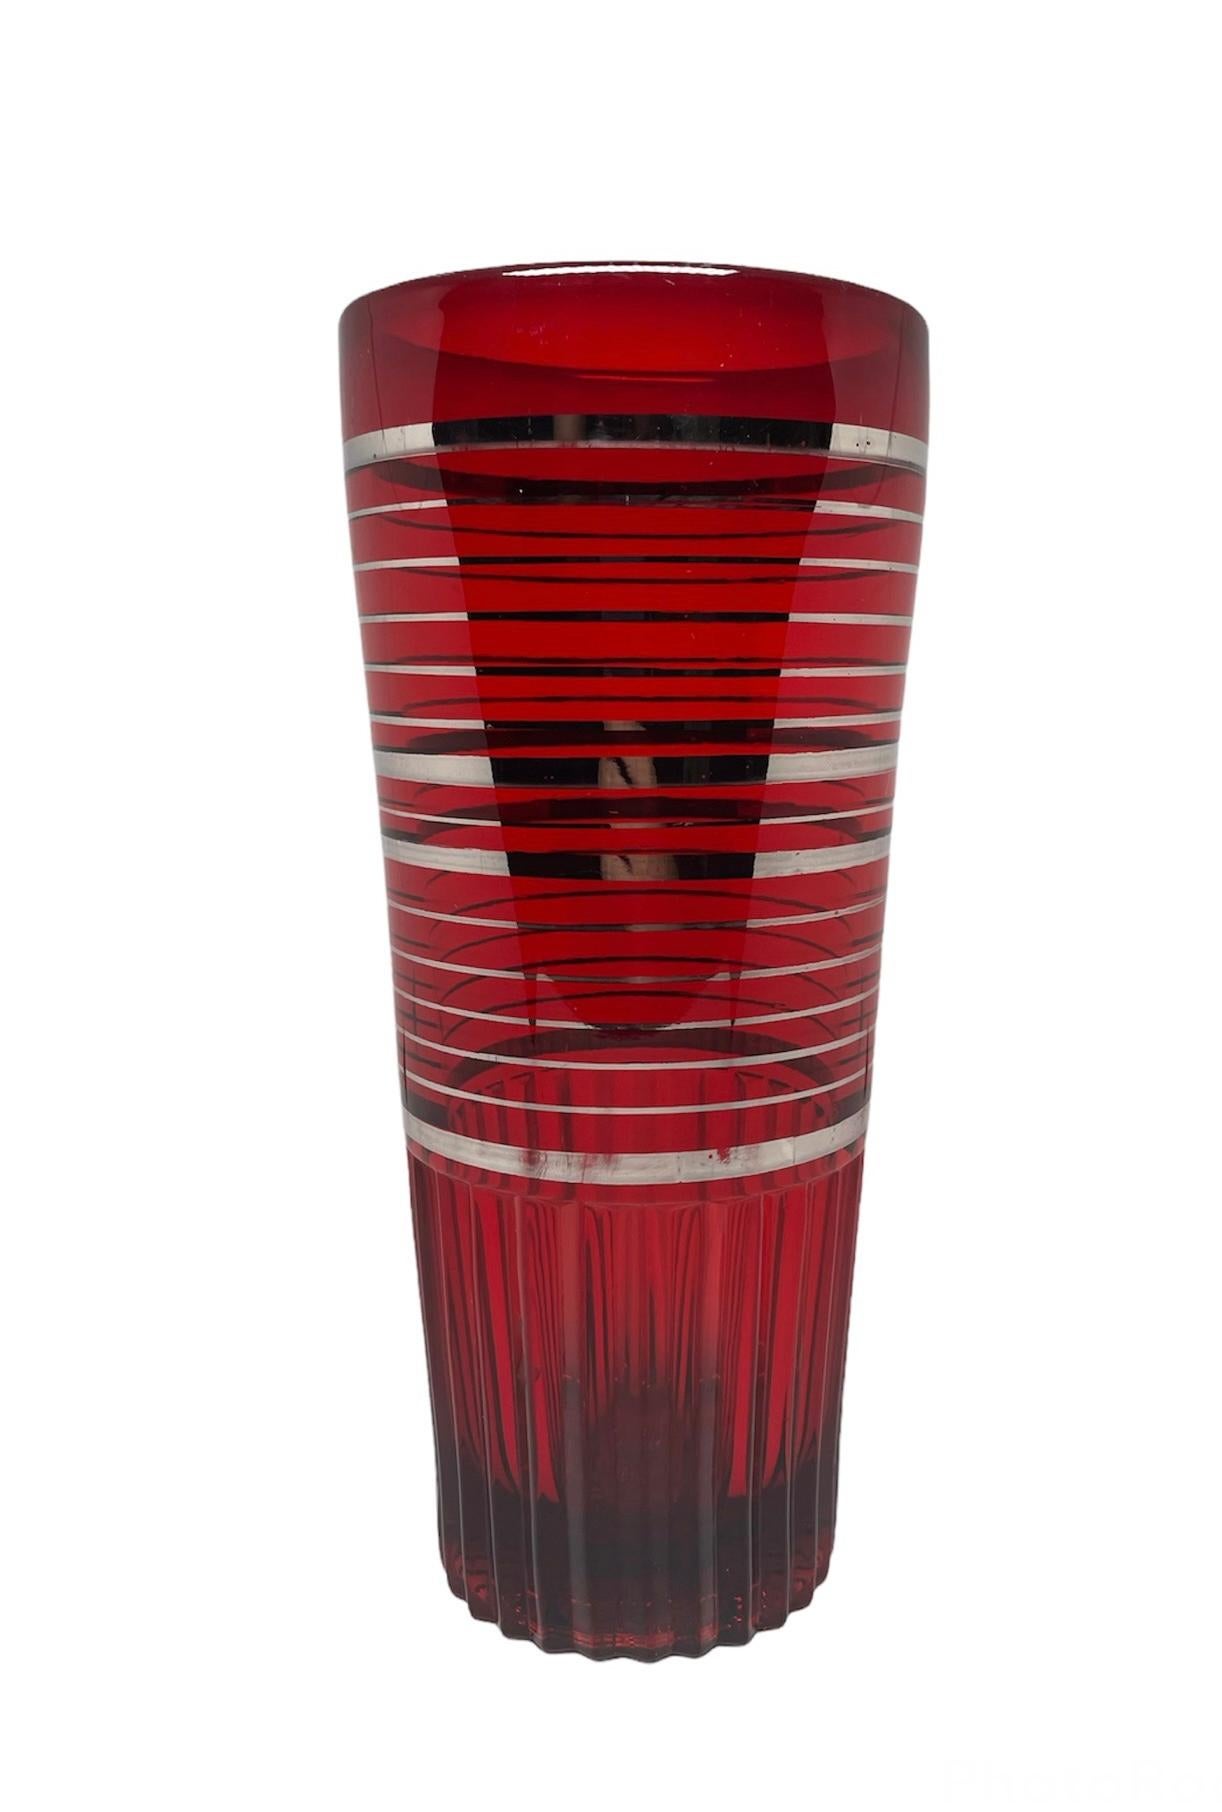 Set of Paden City Ruby Red Glass Cocktail Shaker and Glasses For Sale 1